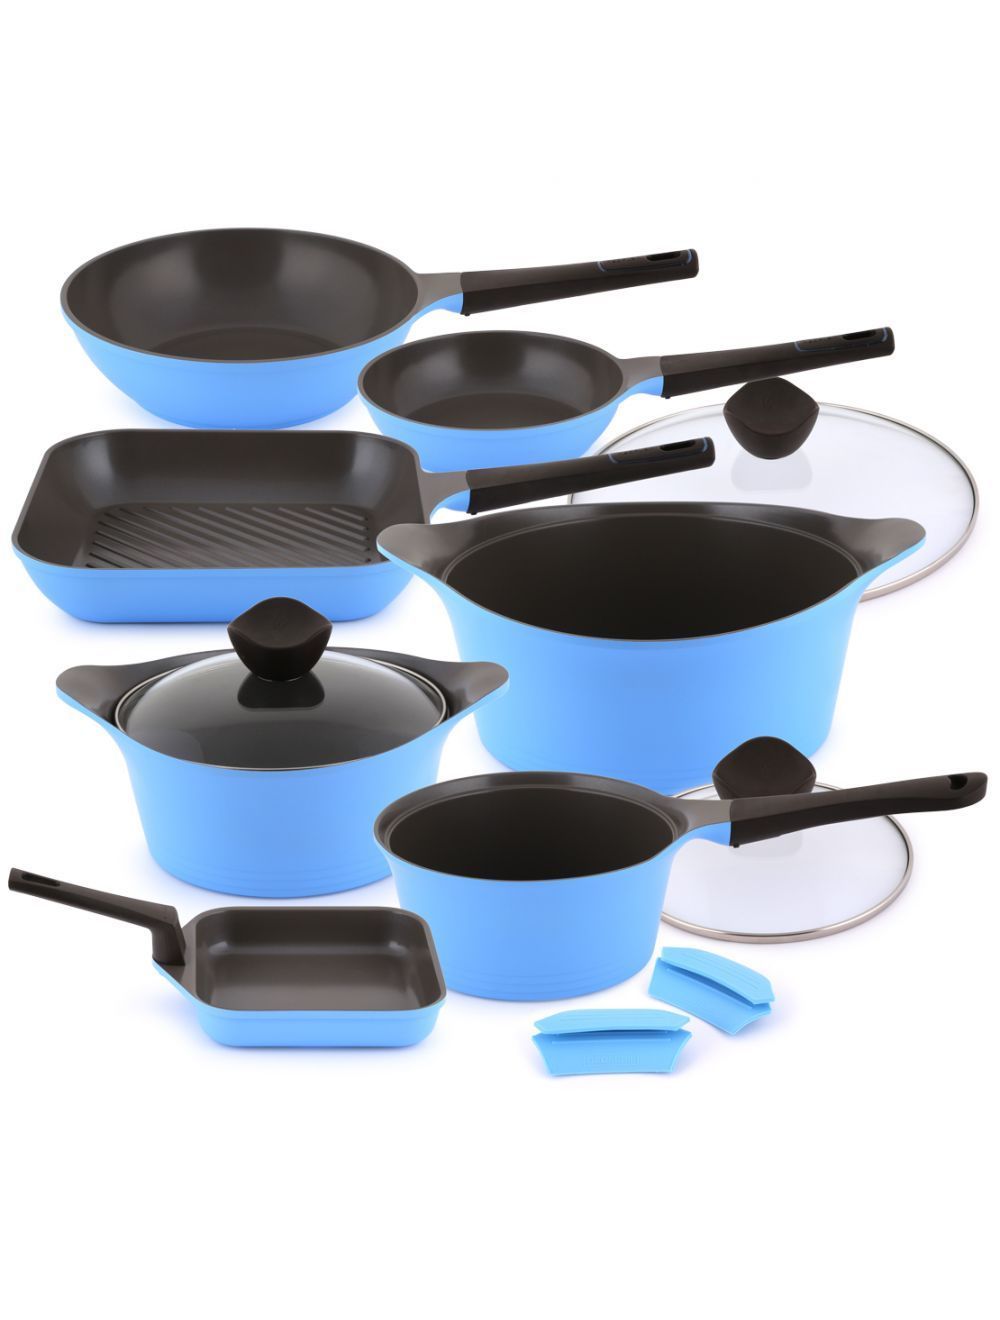 Neoflam Aeni Cookware Set 11 Piece Blue-459502